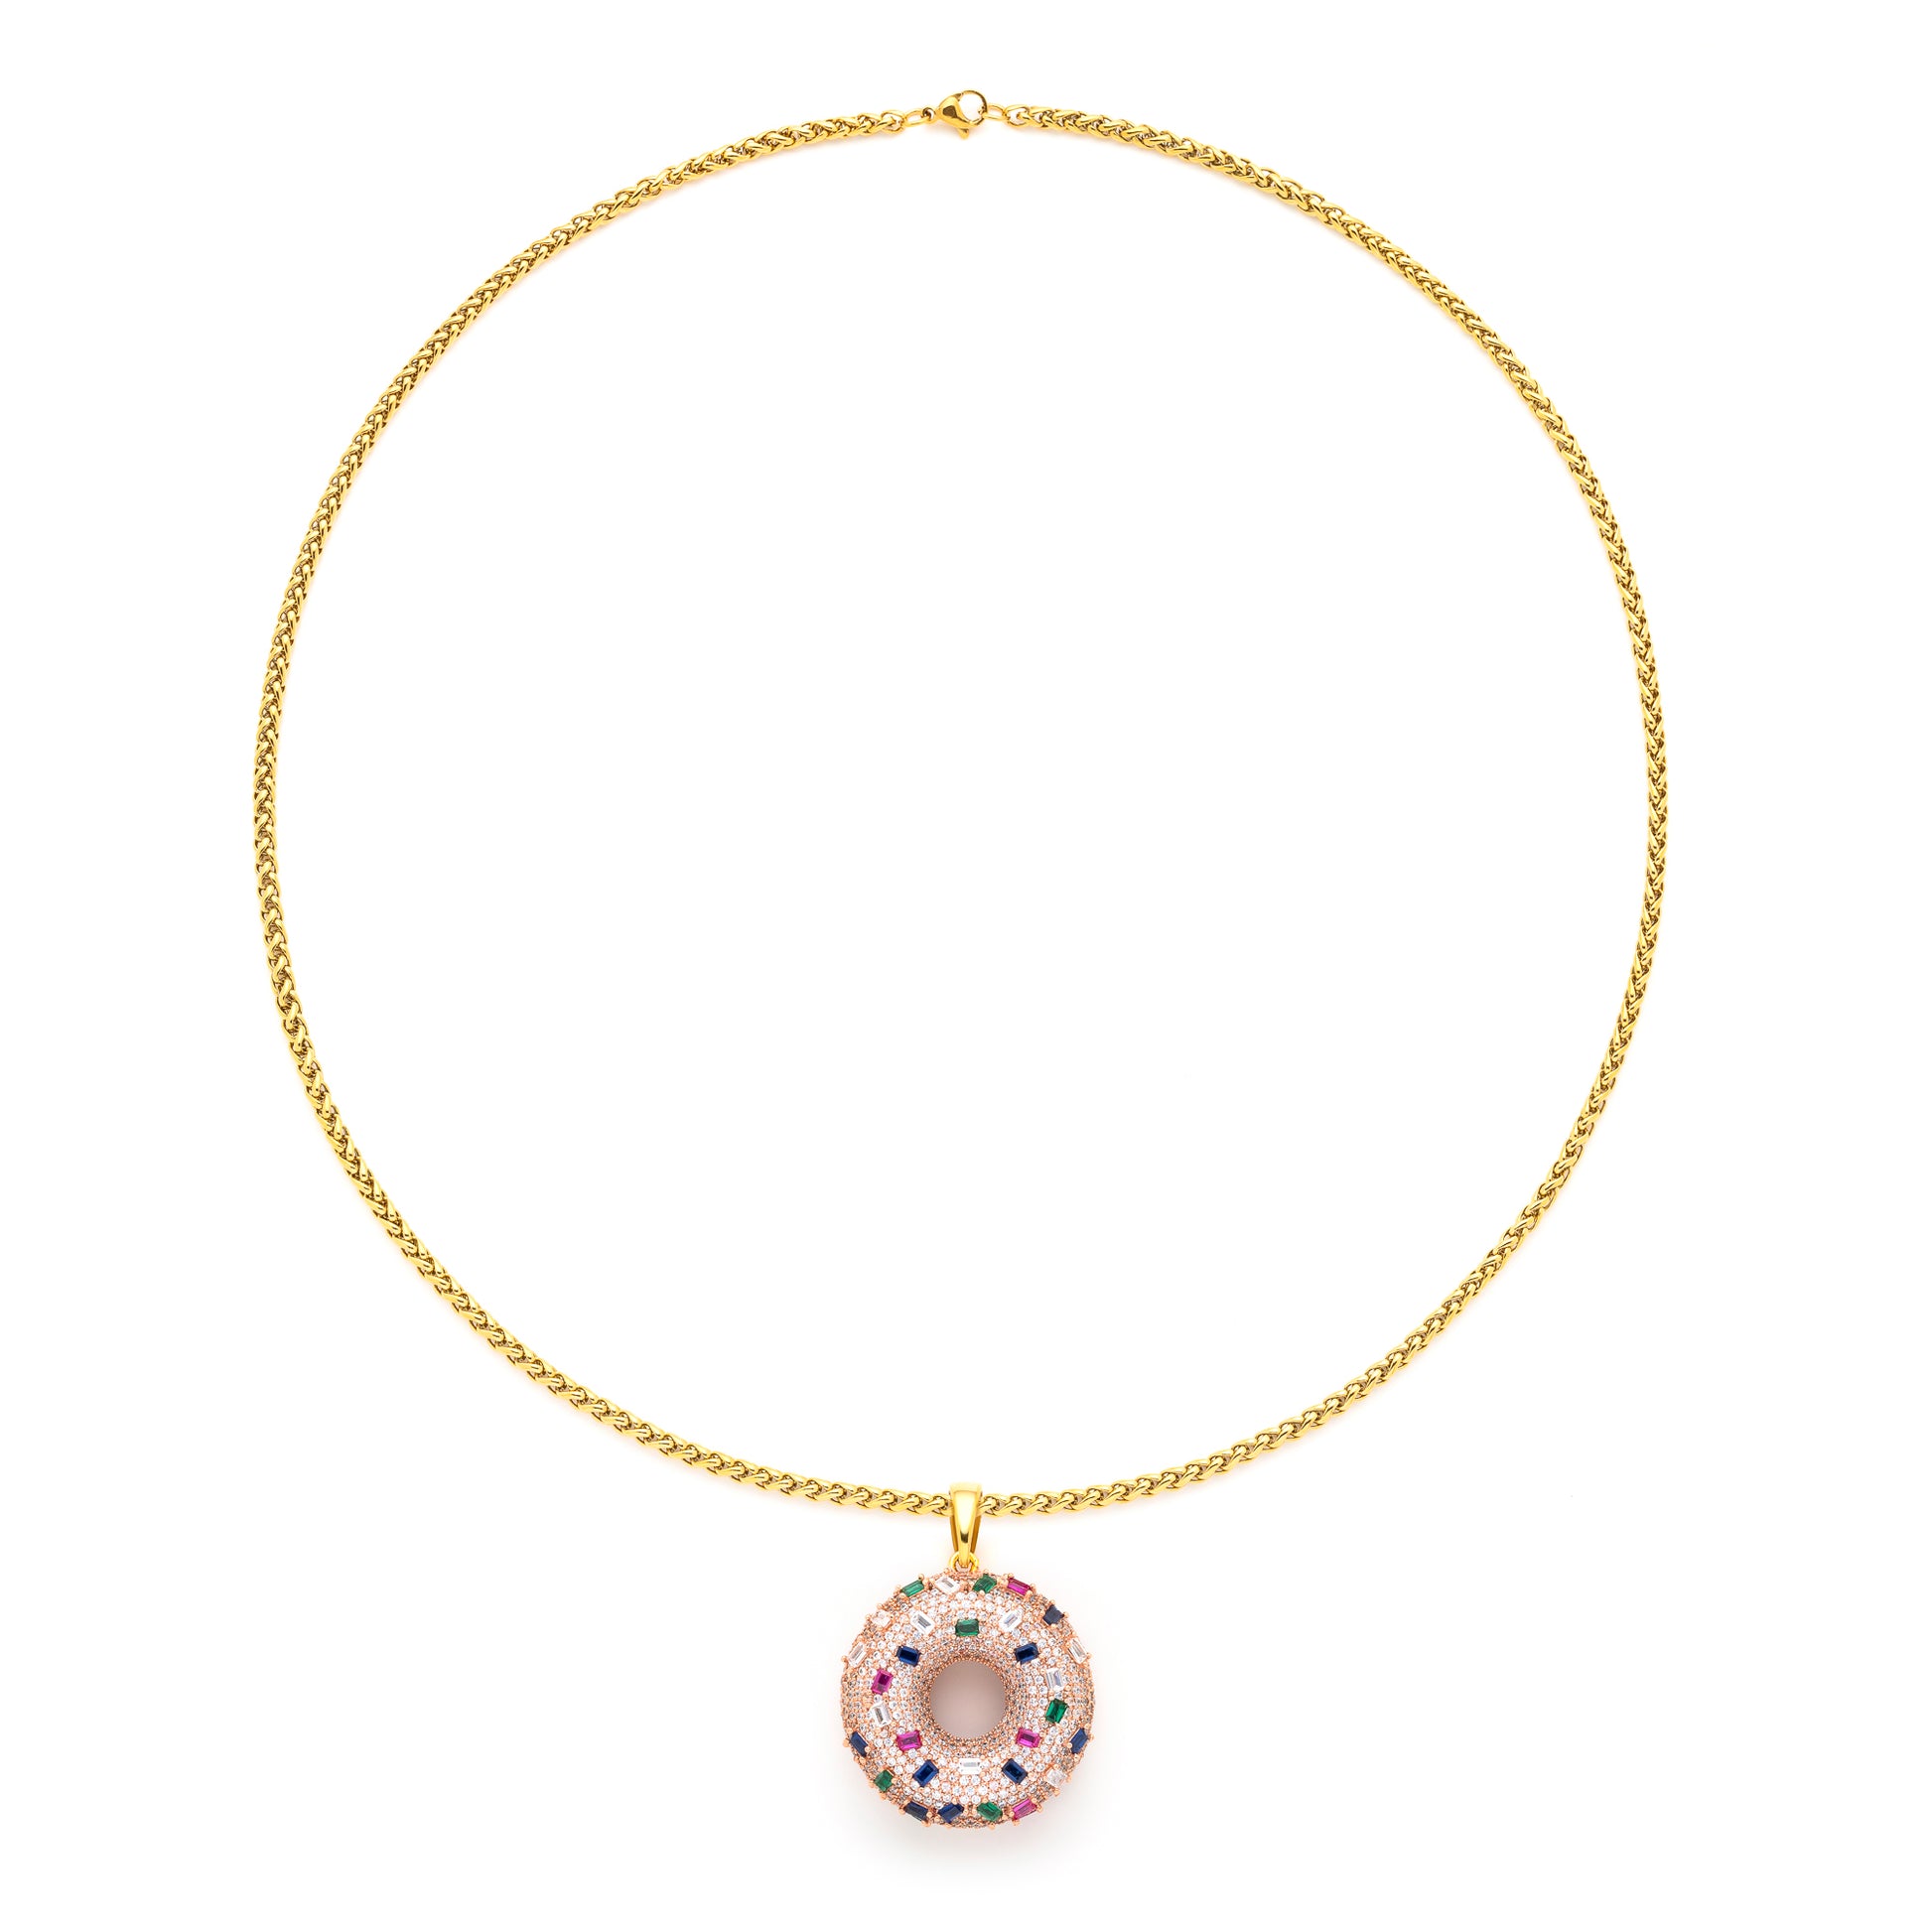 Donut Pendant with 14K Gold Plated Chain